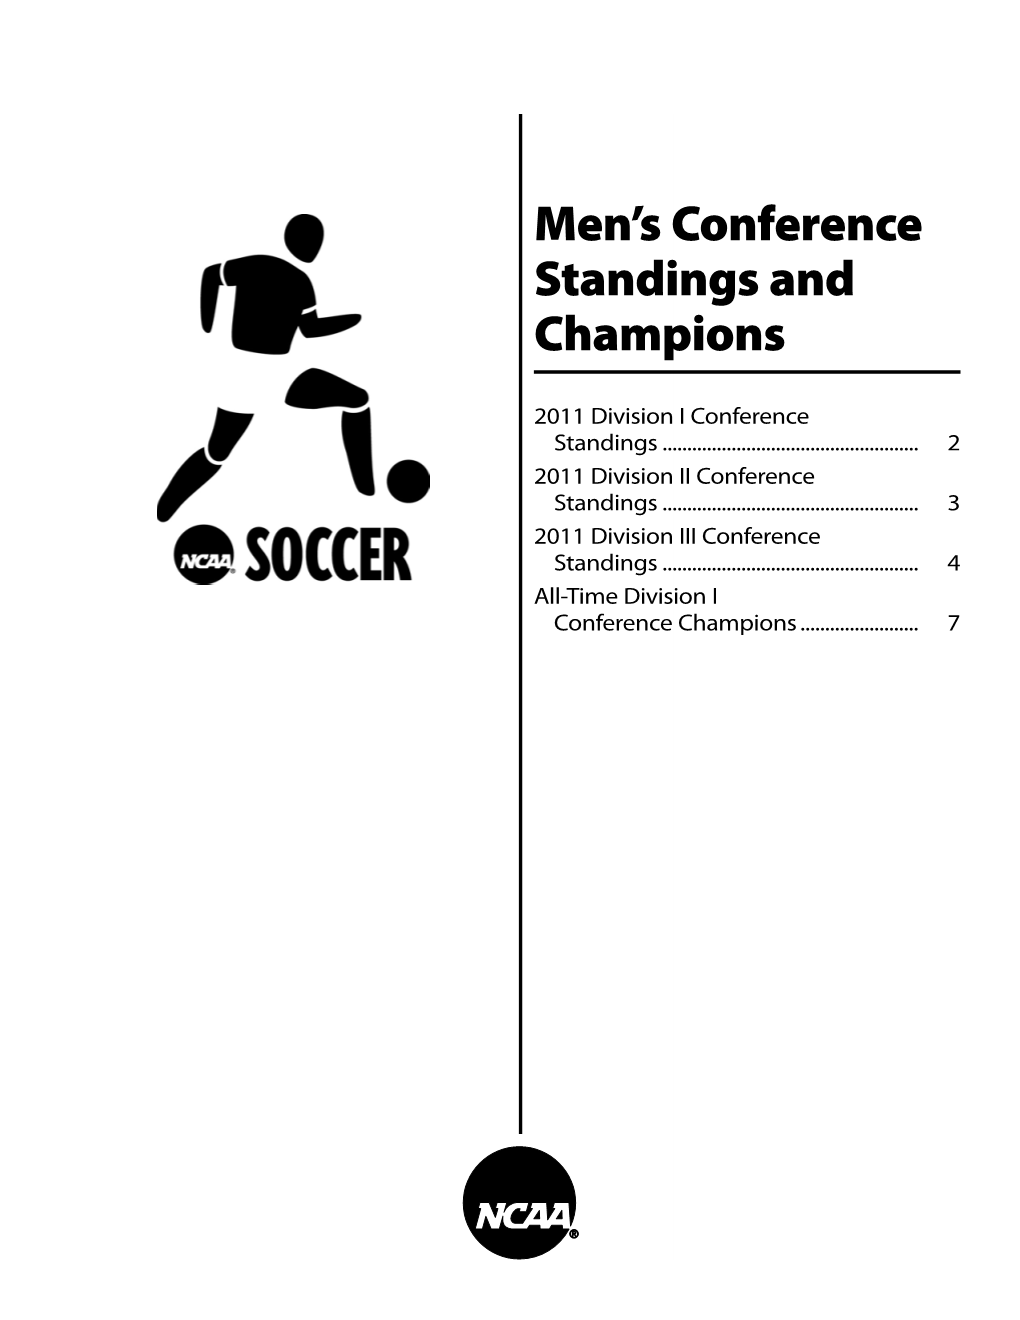 Men's Conference Standings and Champions